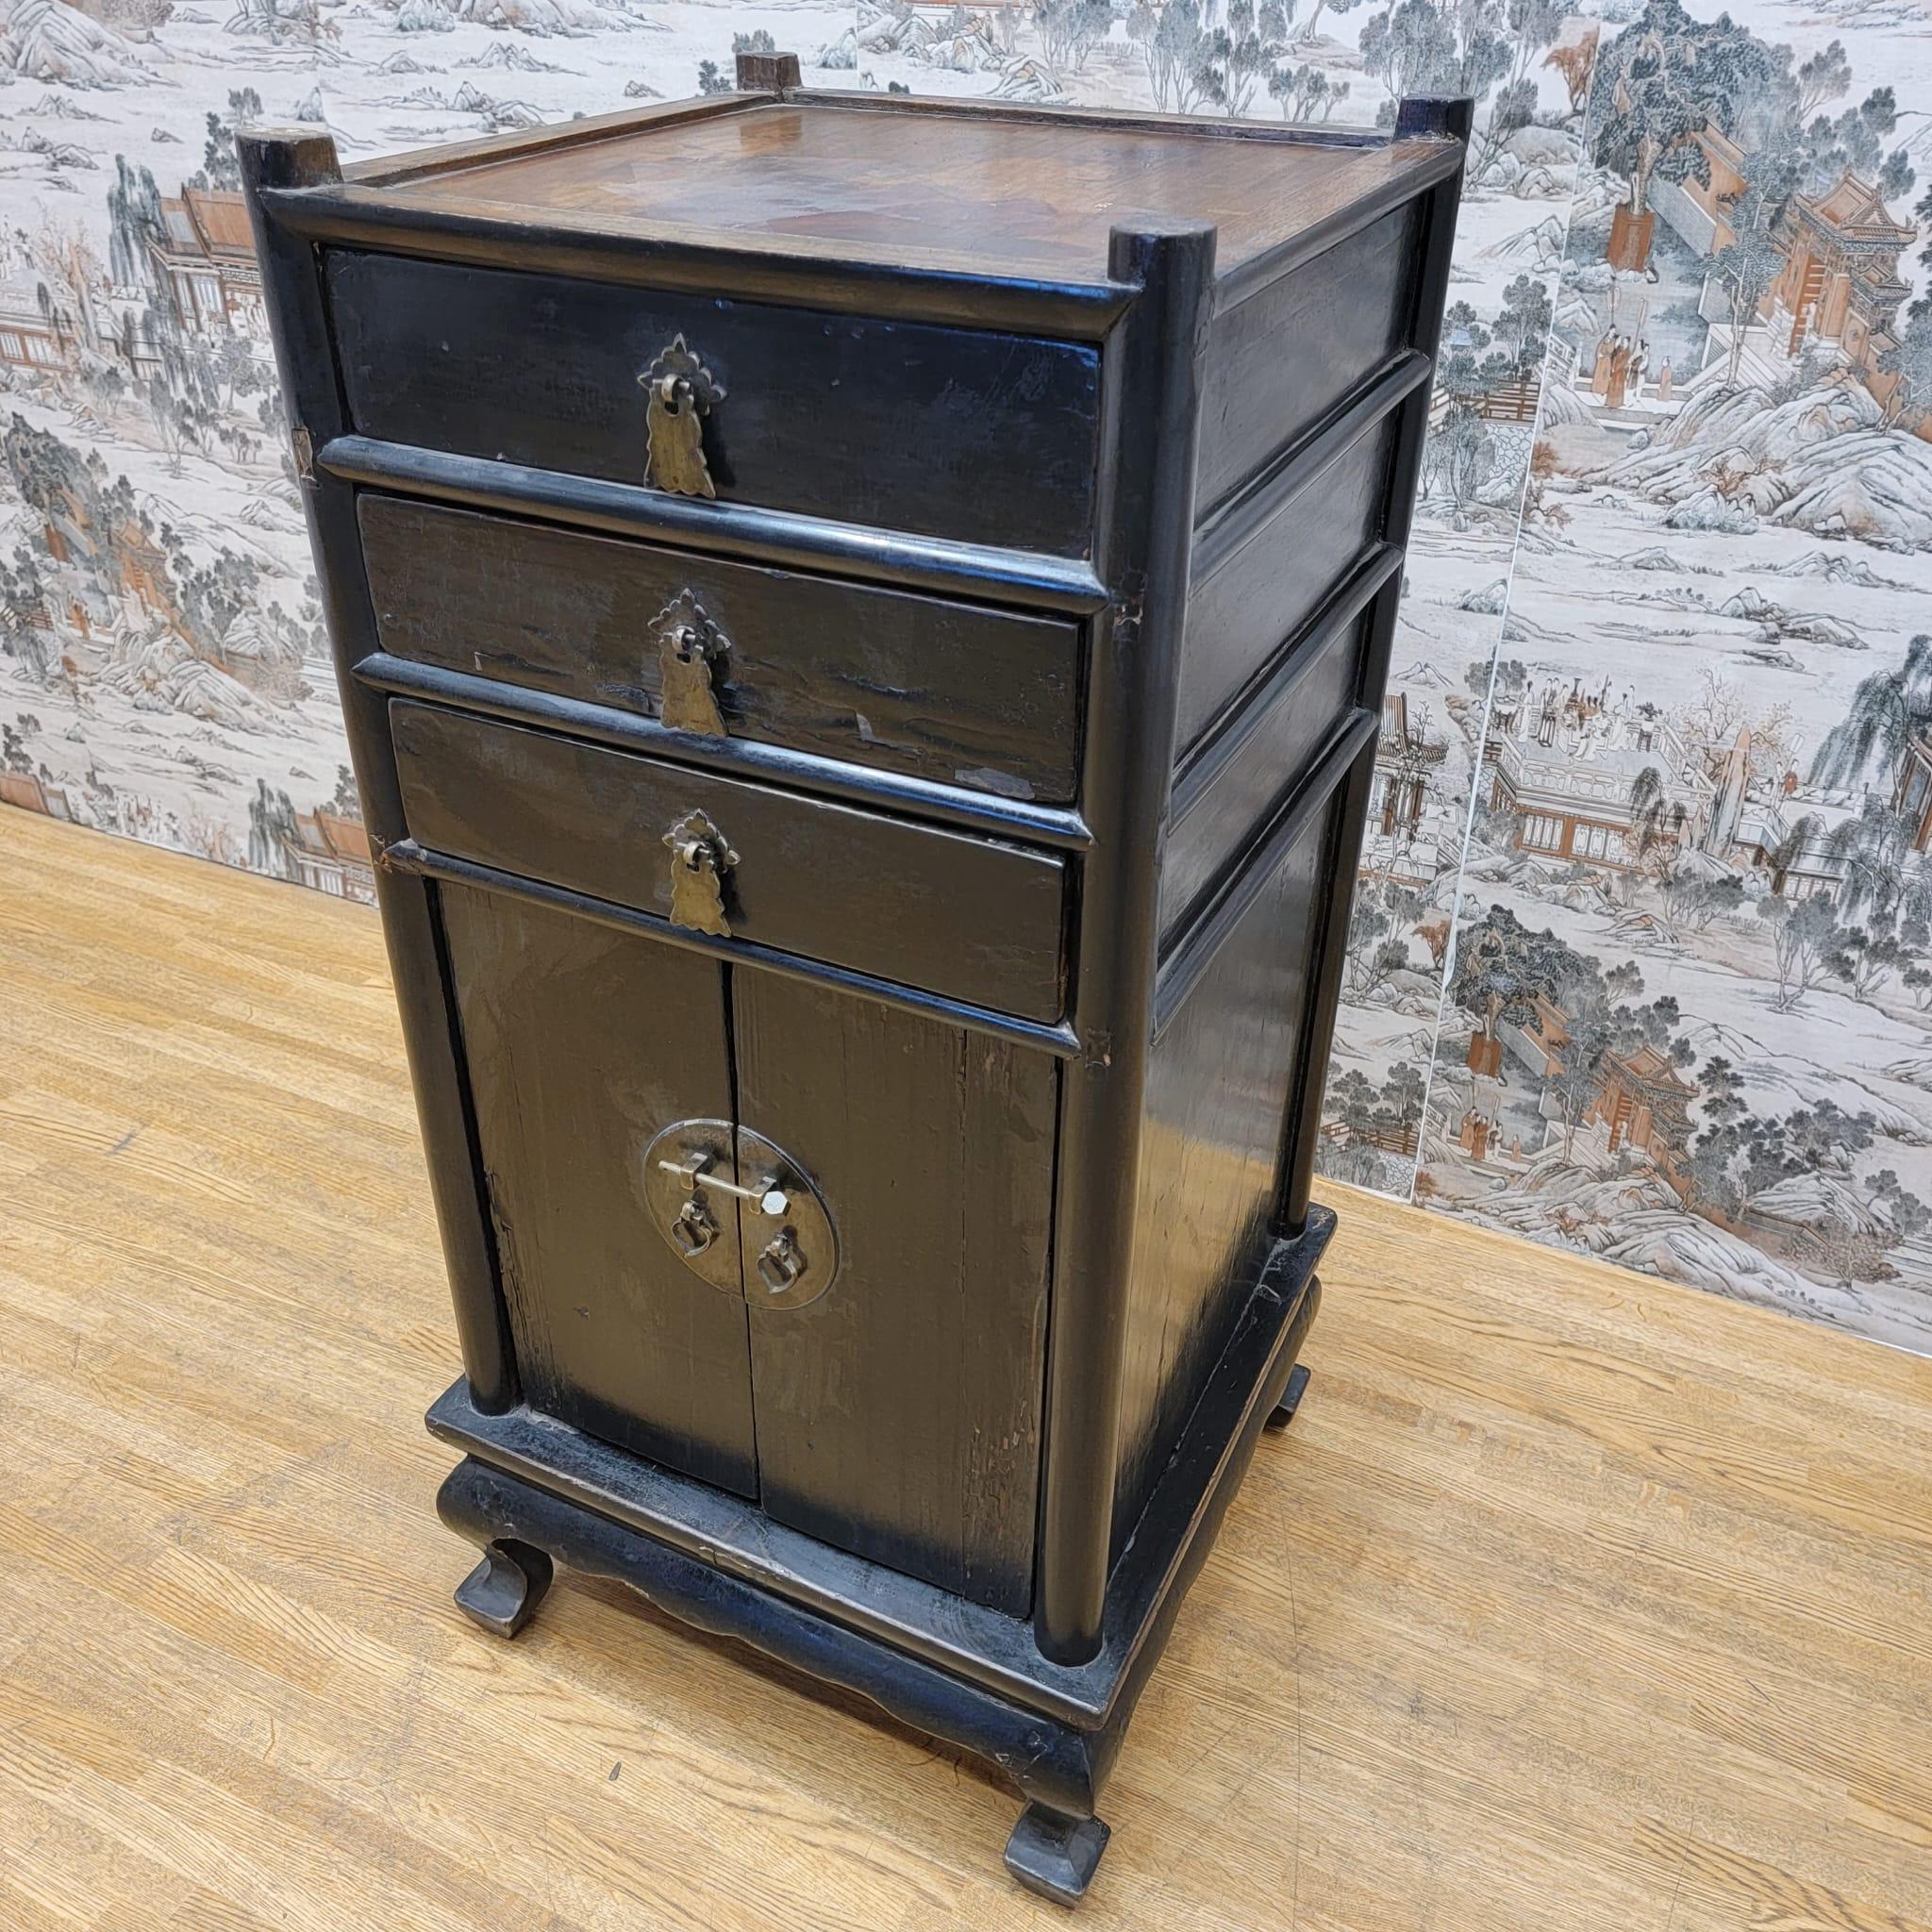 Antique Shanxi Province Elm and Black Lacquer Nightstand / Side Table with Storage

This antique elm wood and black lacquer tall side table from the Shanxi Province has its original color and patina. It has 3 drawers and 2 doors, and 2 shelves